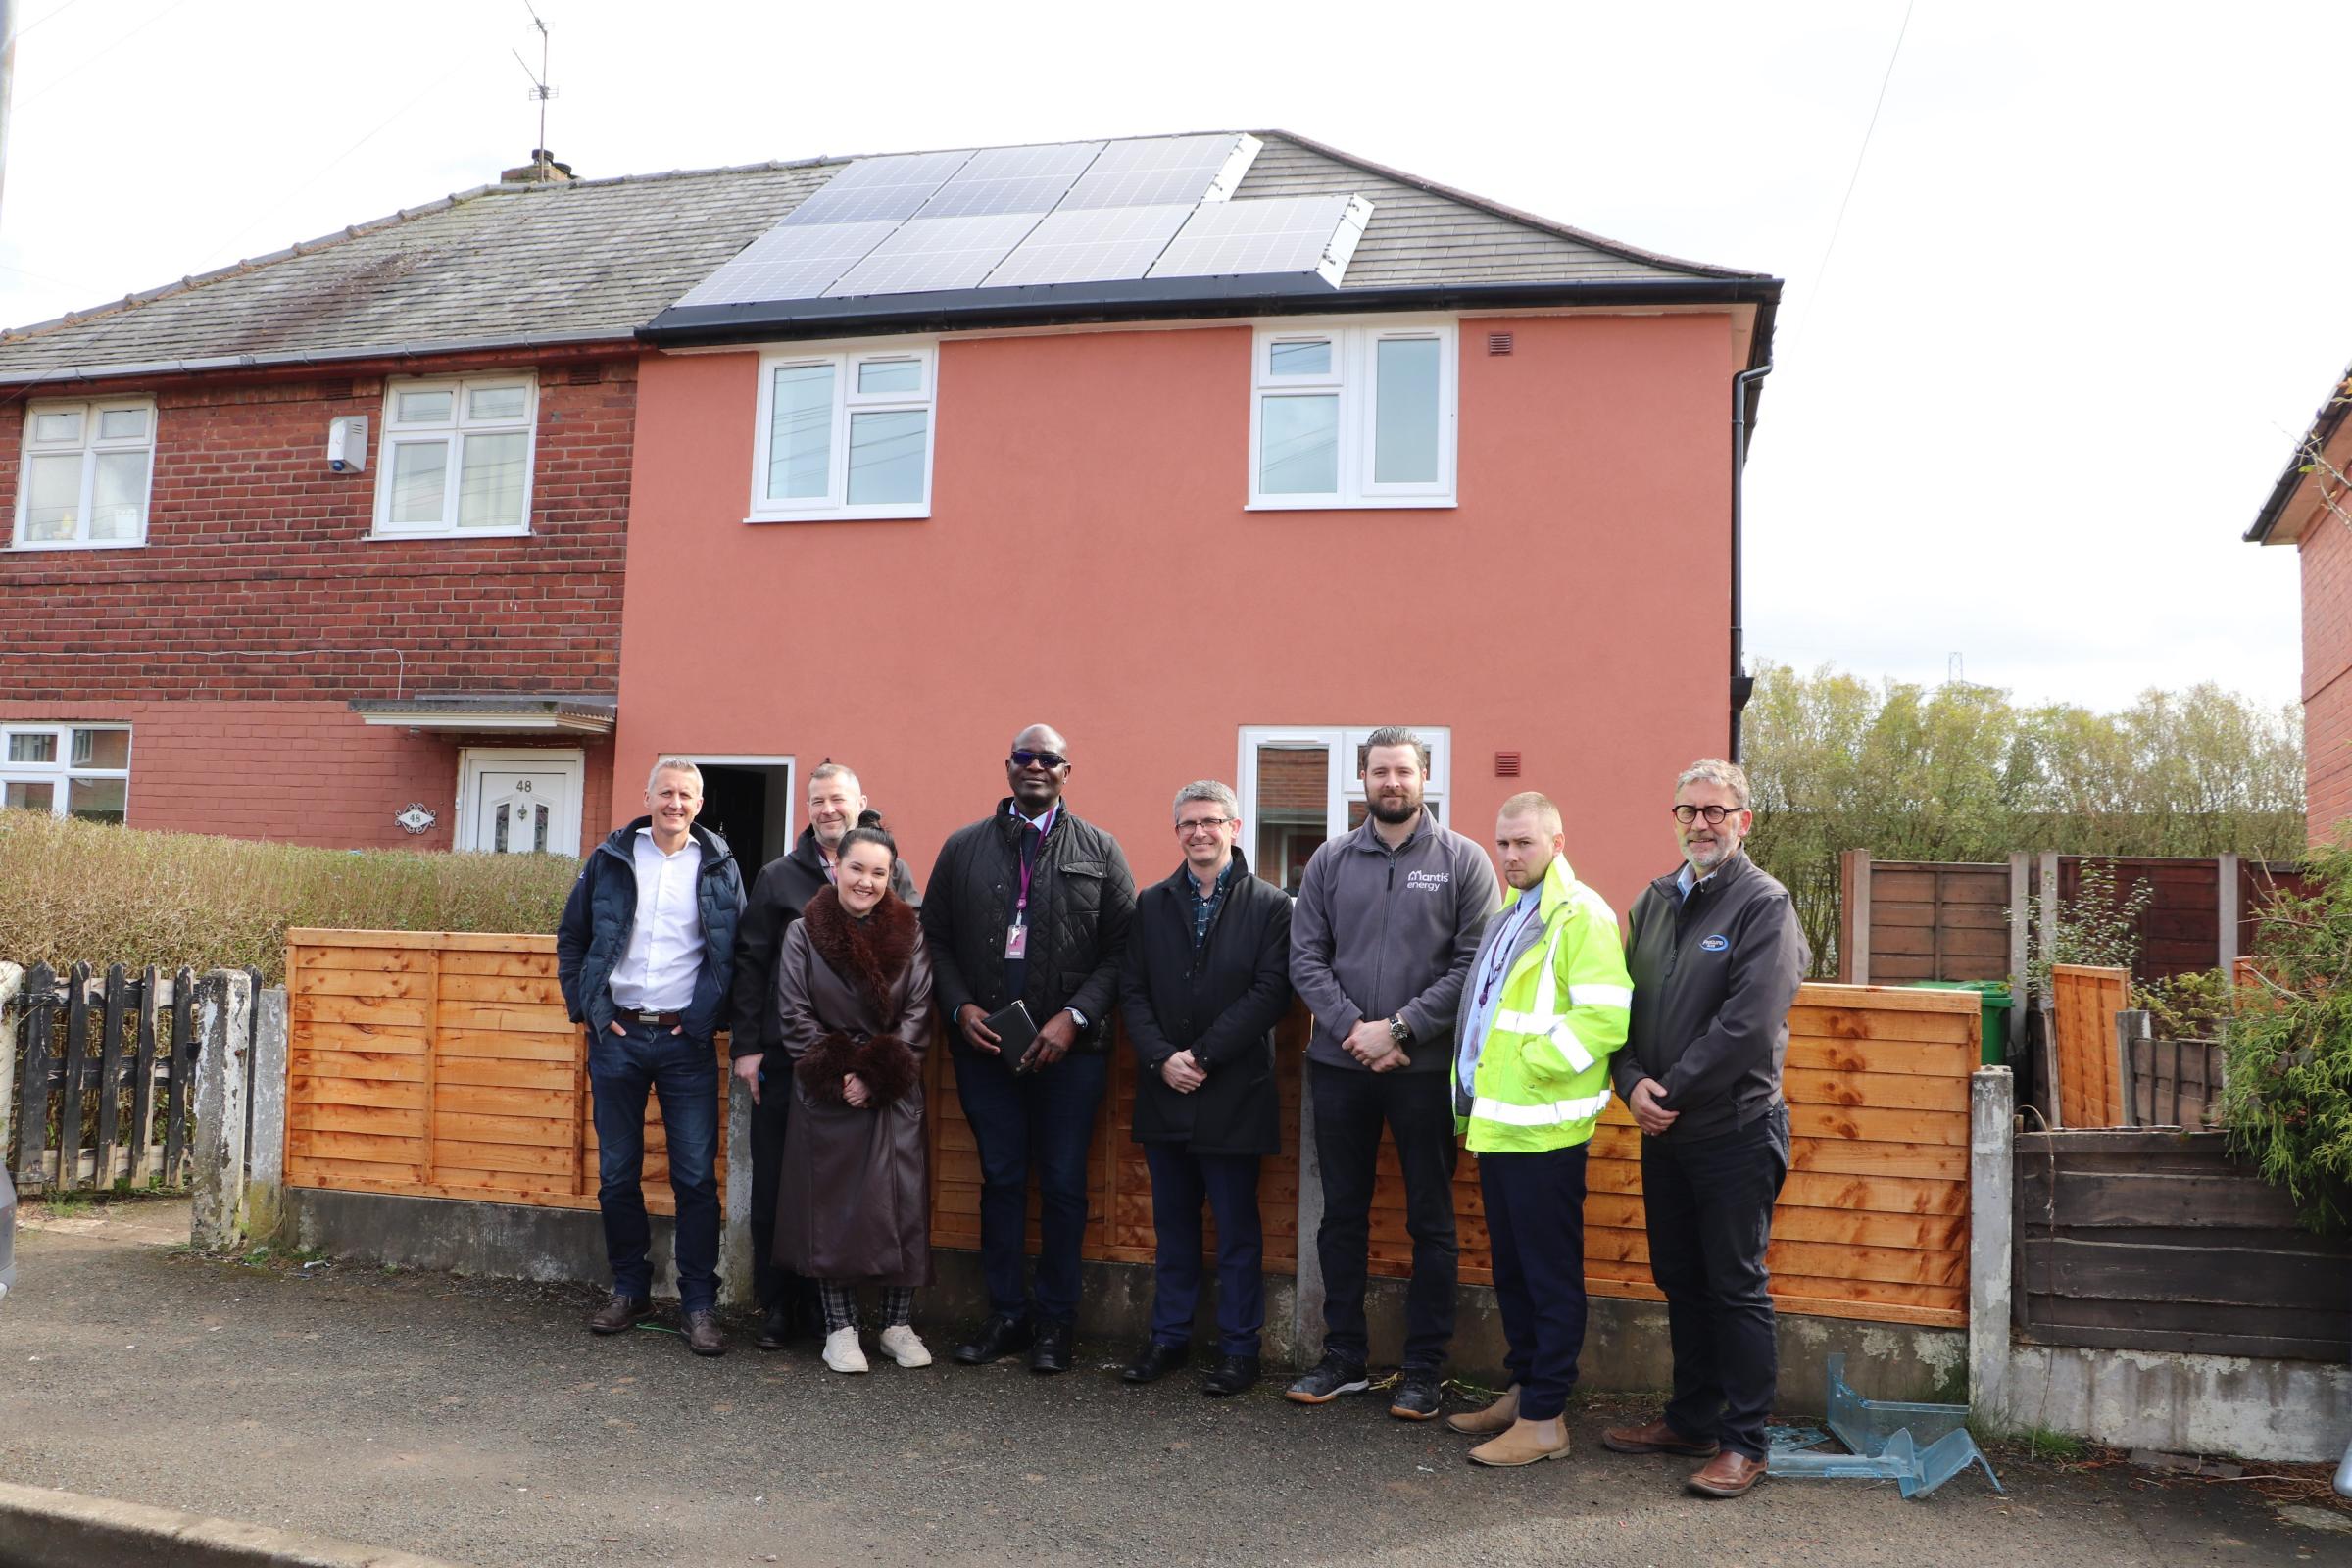 Councillors and contractors take a tour of a recently completed zero carbon retrofit in Higher Blackley (Picture: Manchester City Council)